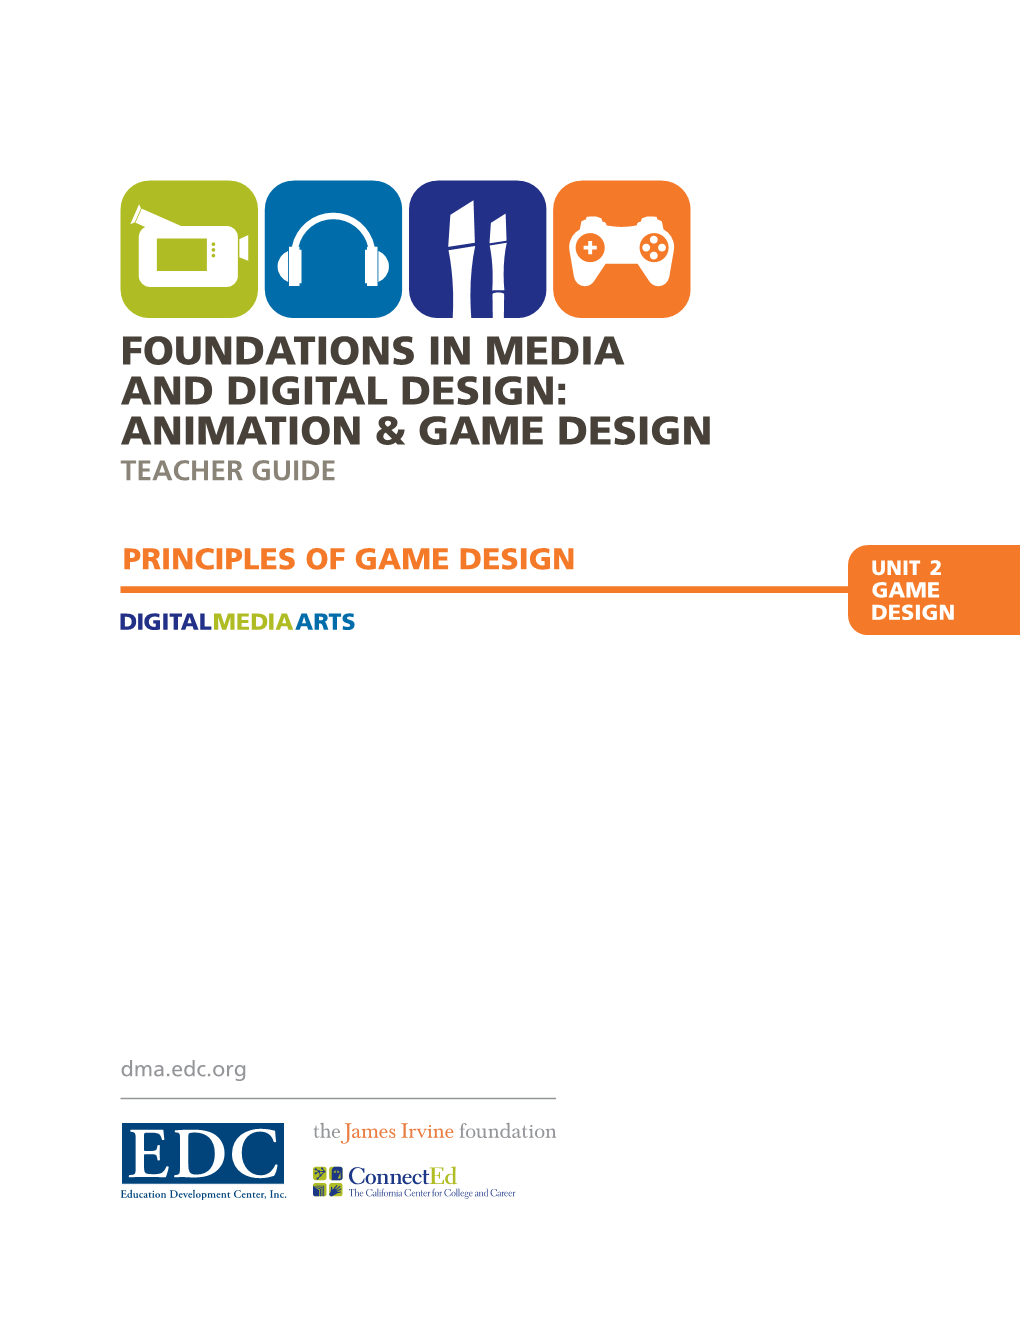 Foundations in Media and Digital Design: Animation & Game Design Teacher Guide